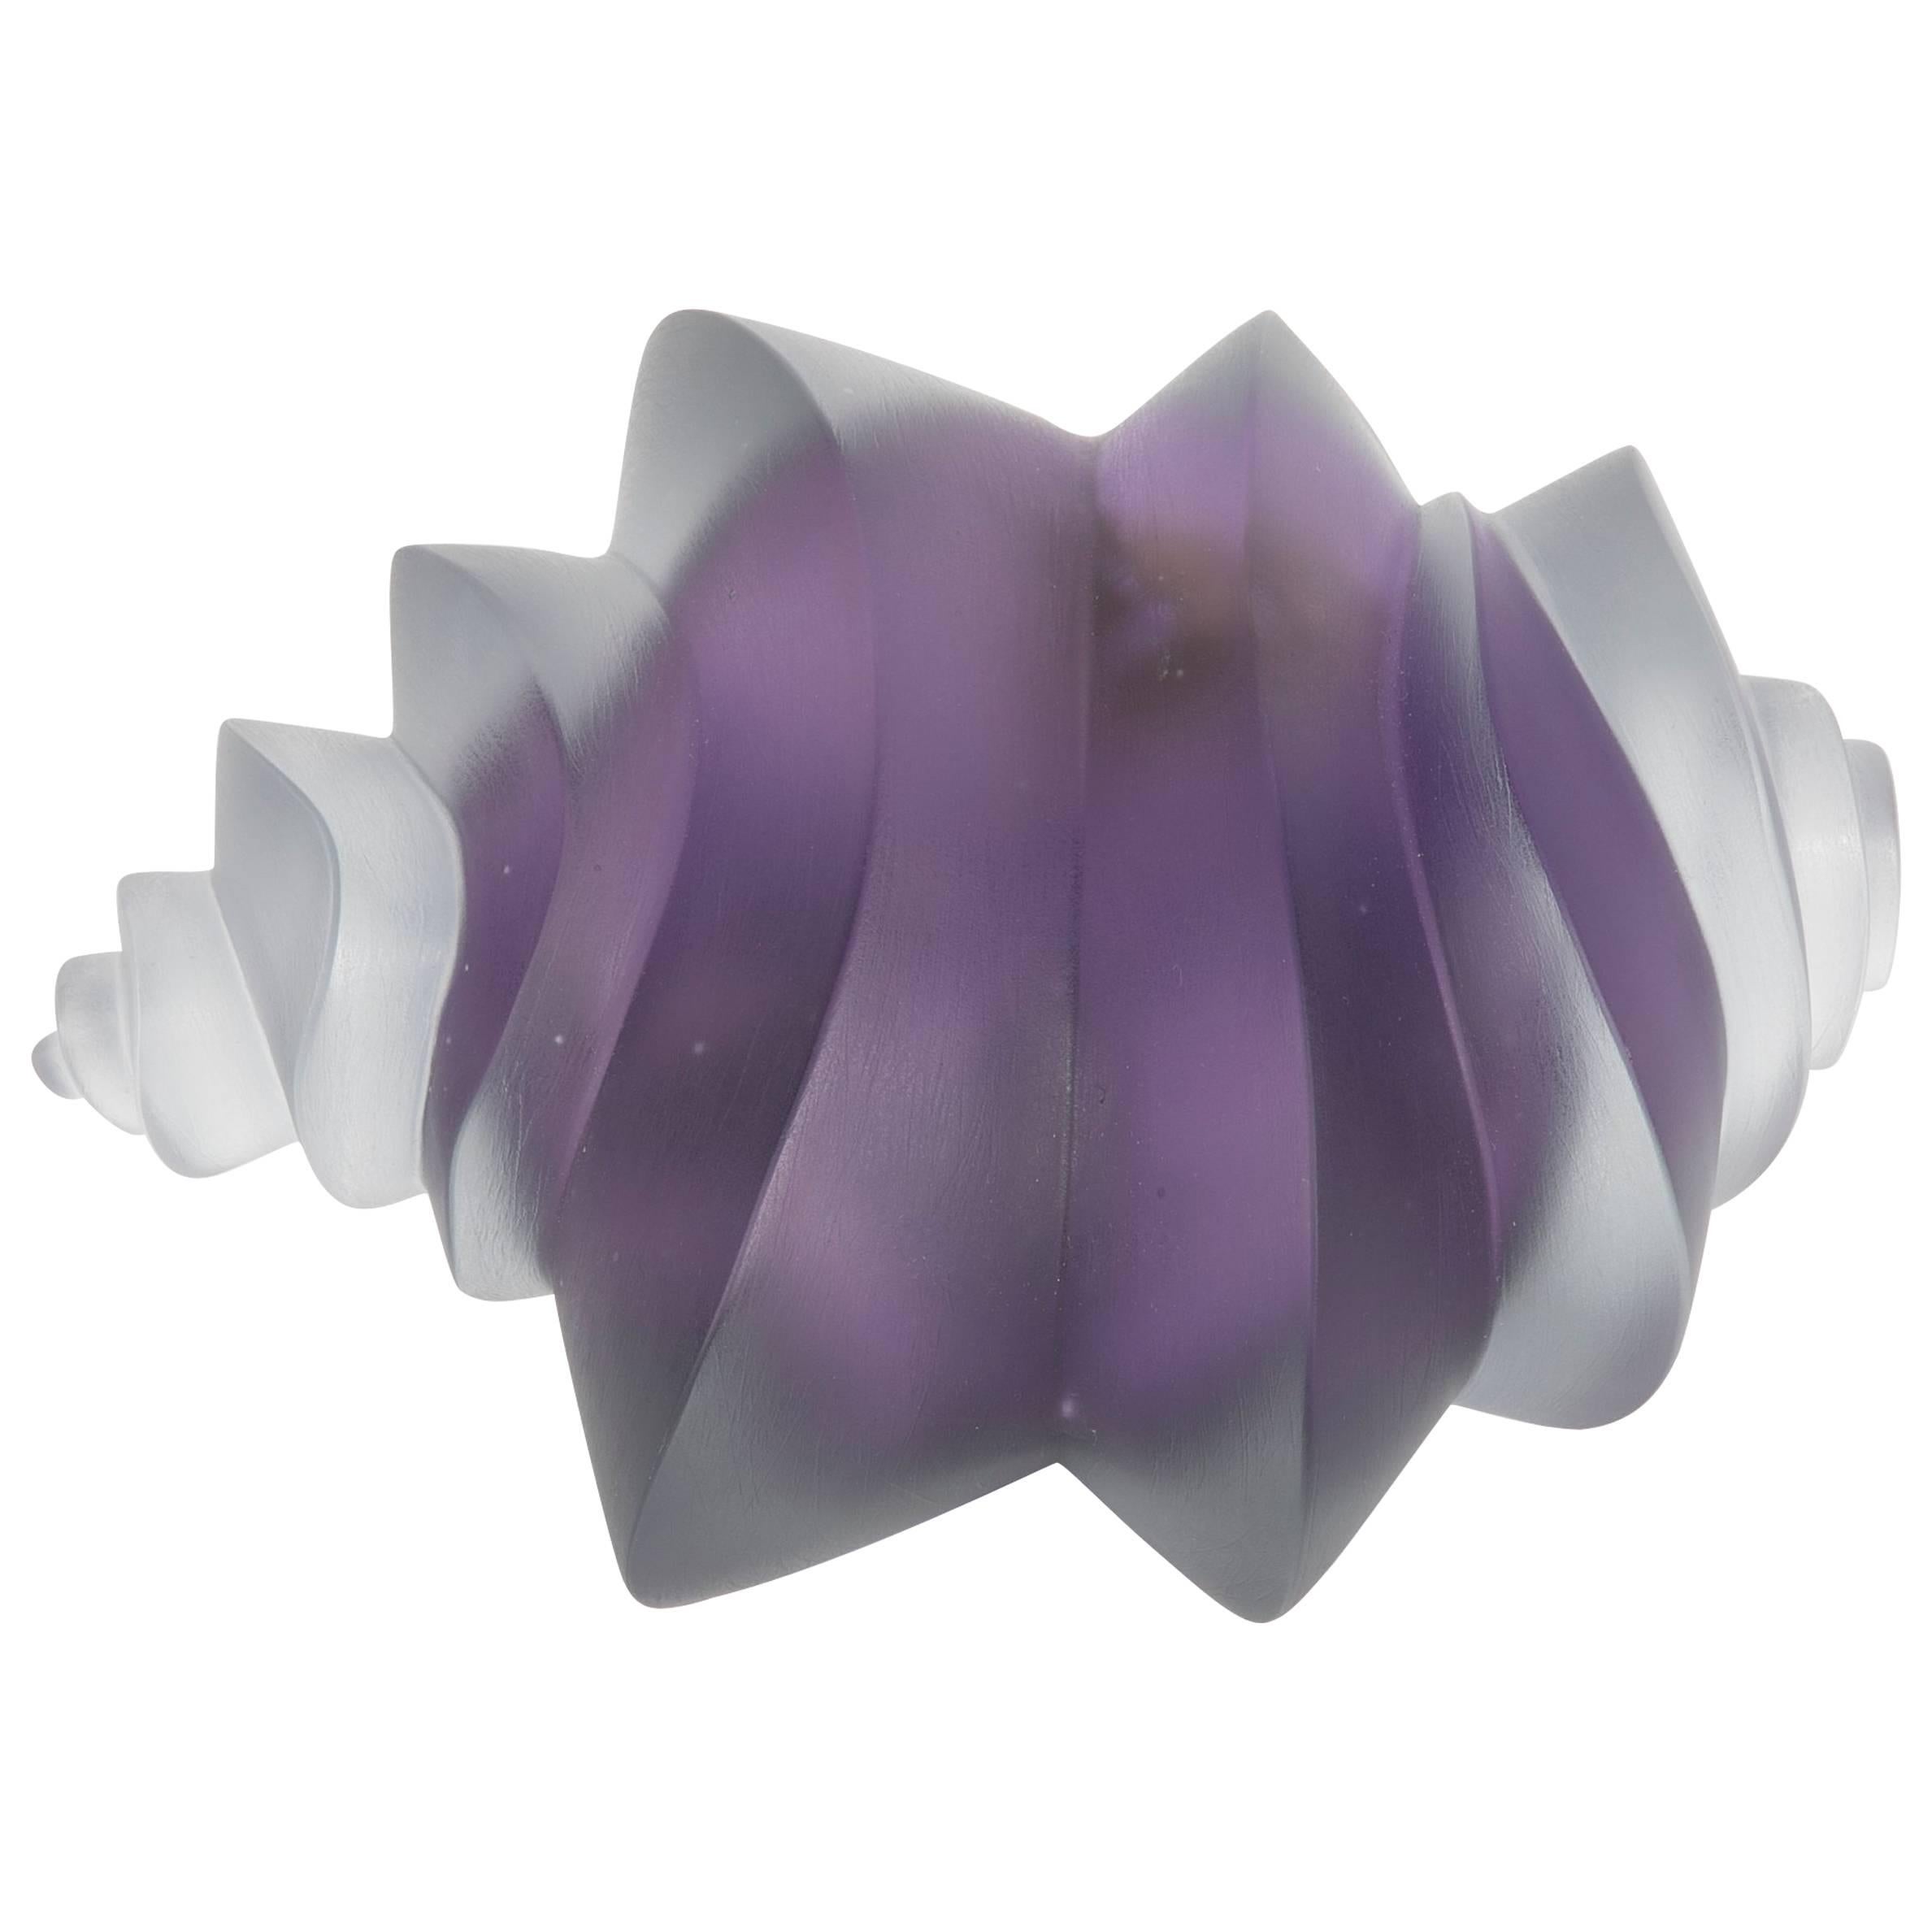 "Amethyst Burleigh" Glass Sculpture by Brad Copping